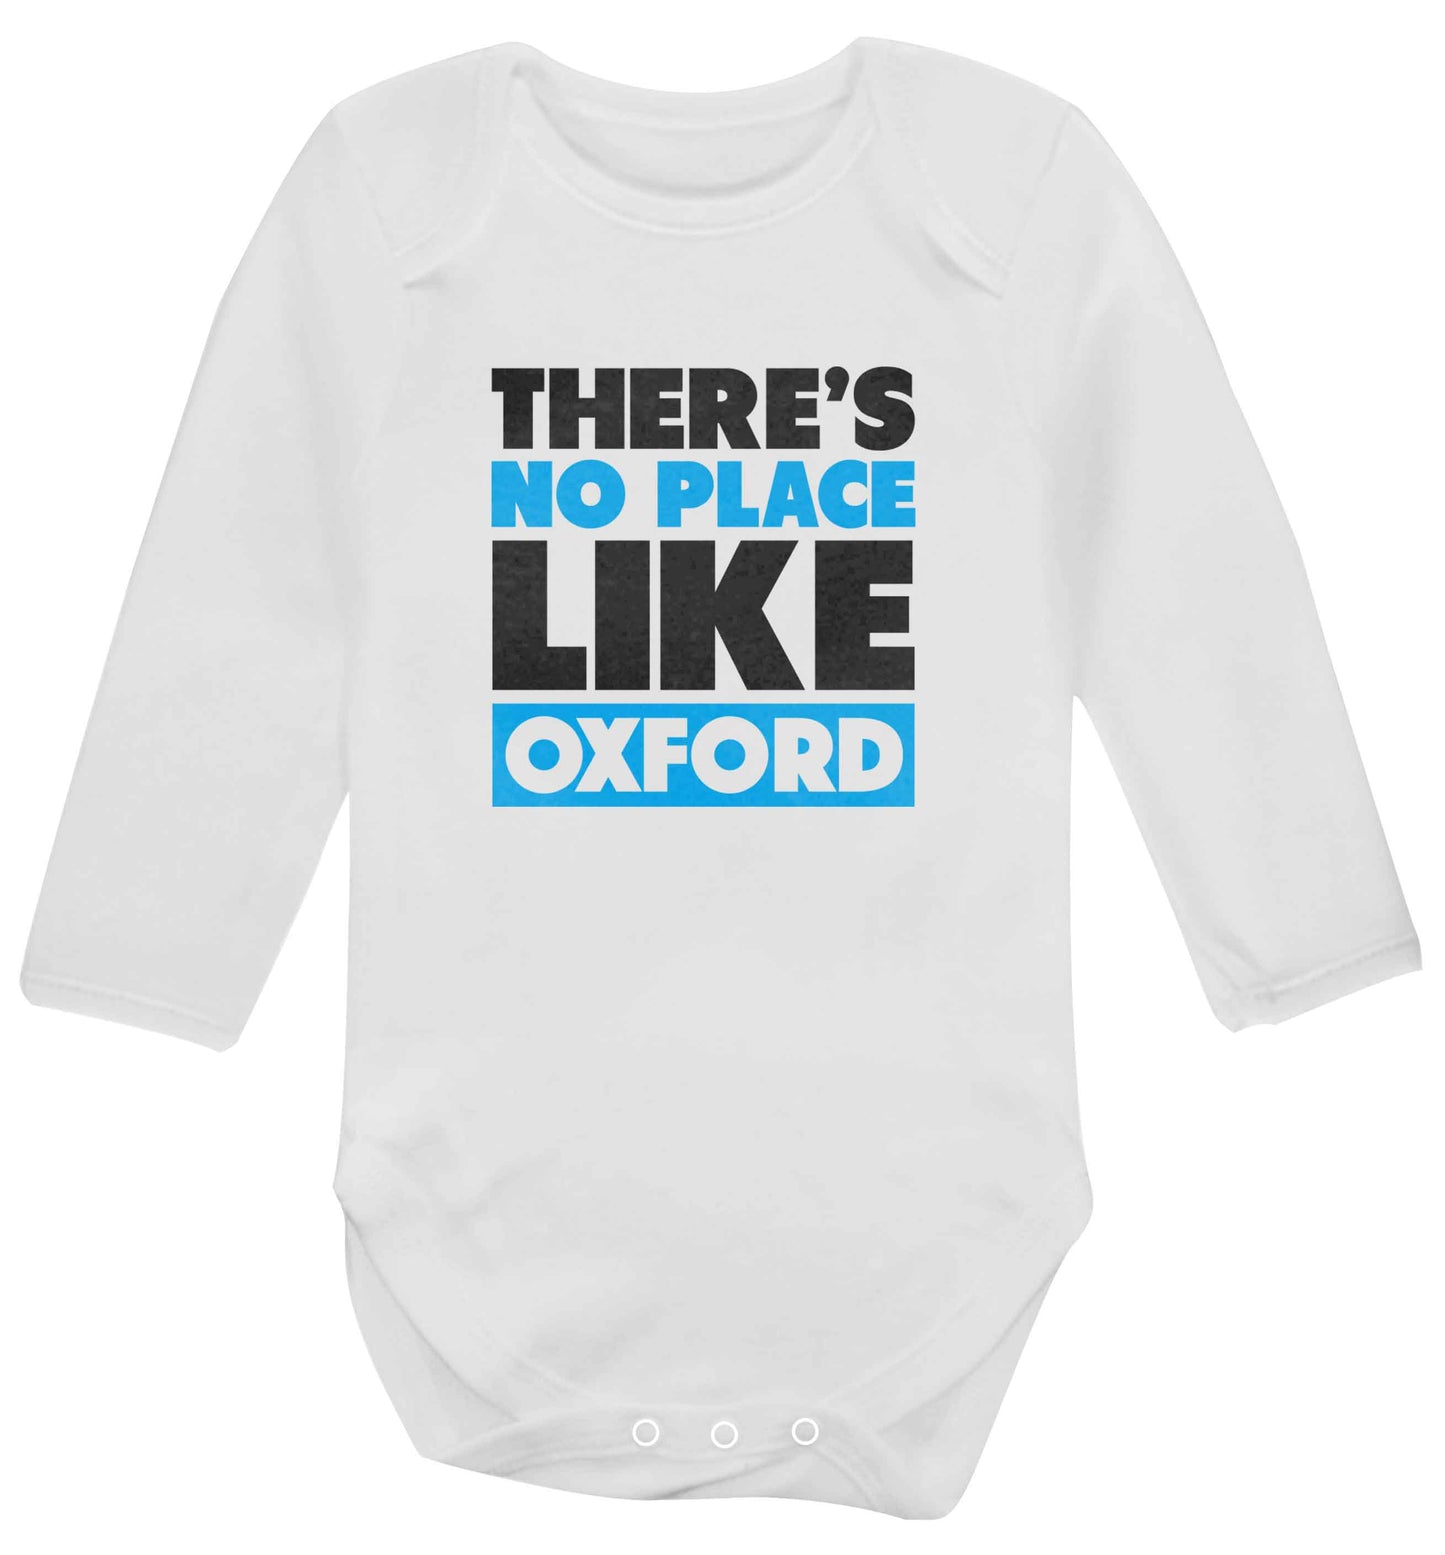 There's no place like Oxford baby vest long sleeved white 6-12 months